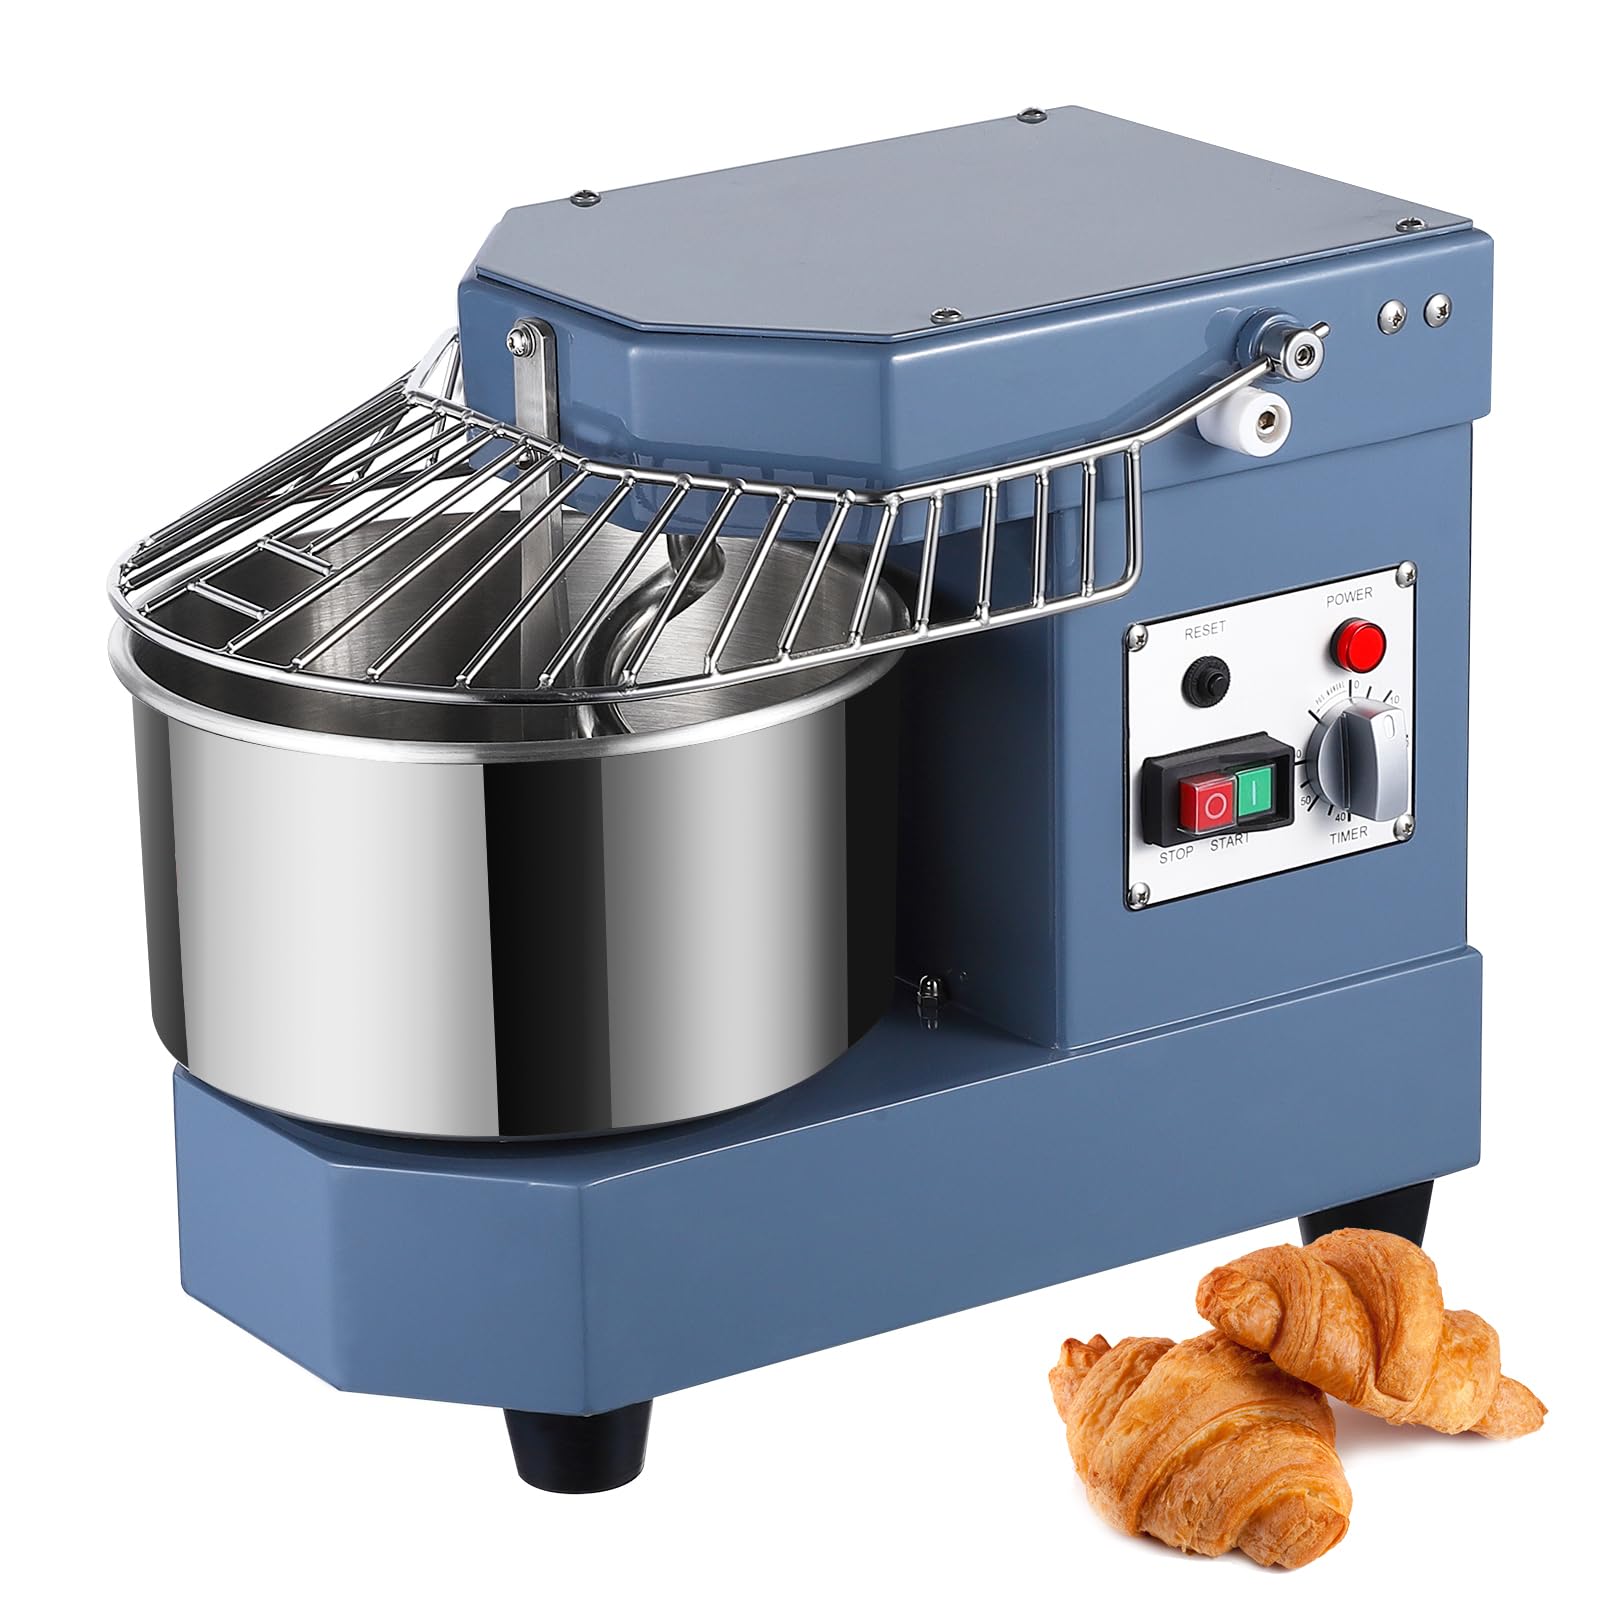 8Qt 450W Dual Rotating Commercial Dough Mixer with Steel Bowl